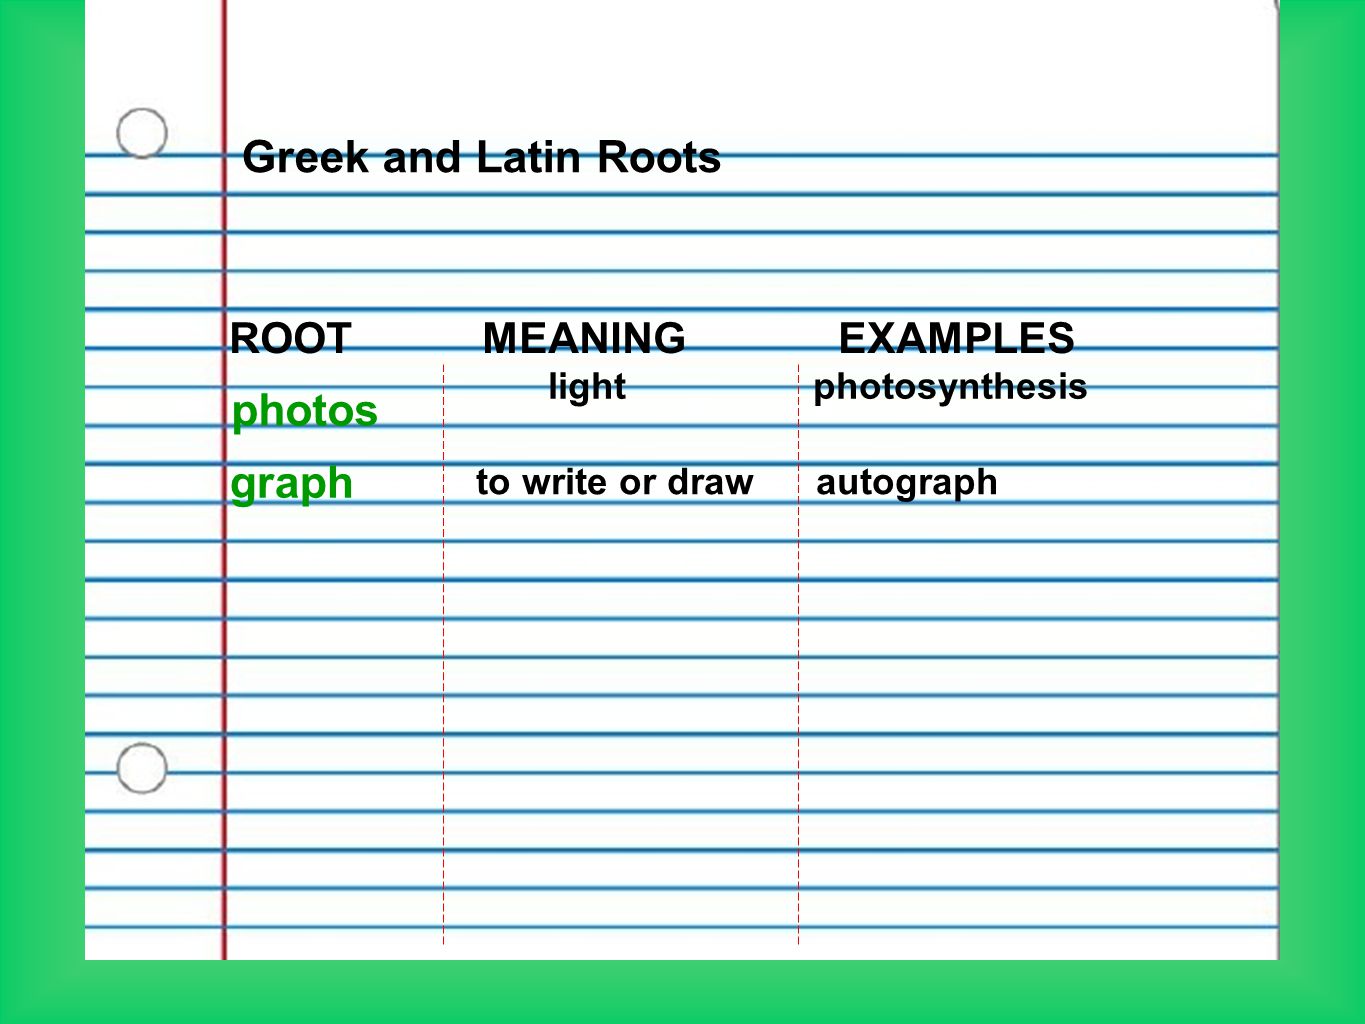 Greek and Latin Roots photos graph ROOT MEANING EXAMPLES